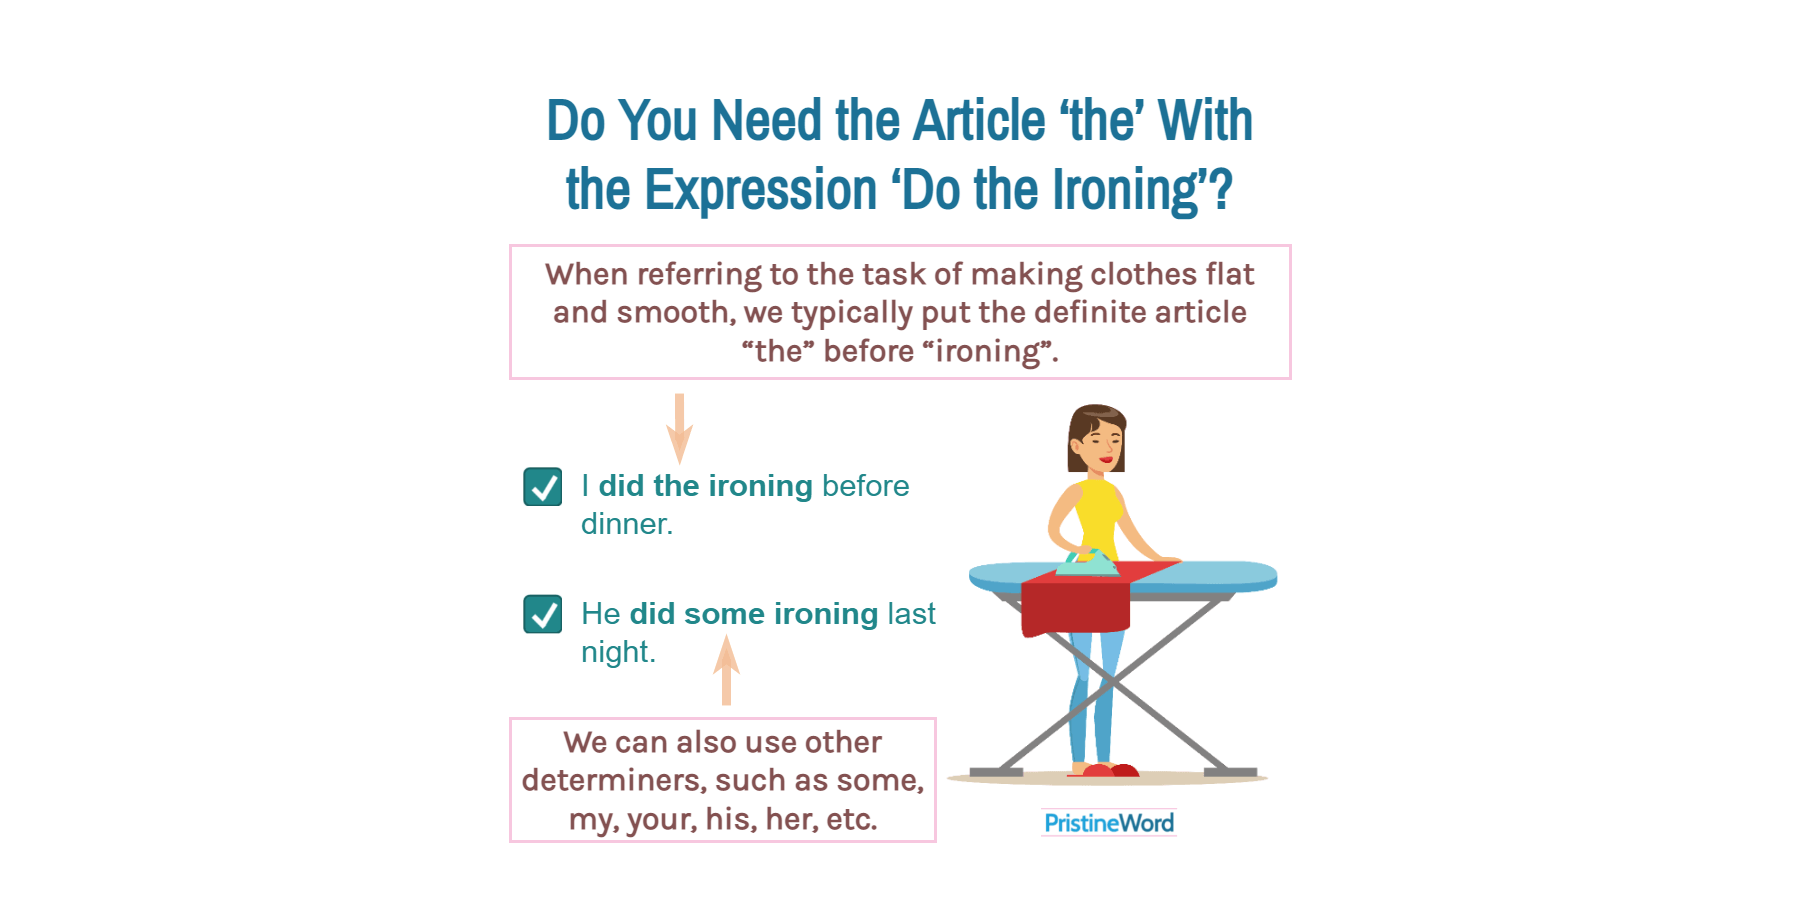 Do You Need the Article ‘the’ With the Expression ‘Do the Ironing’?